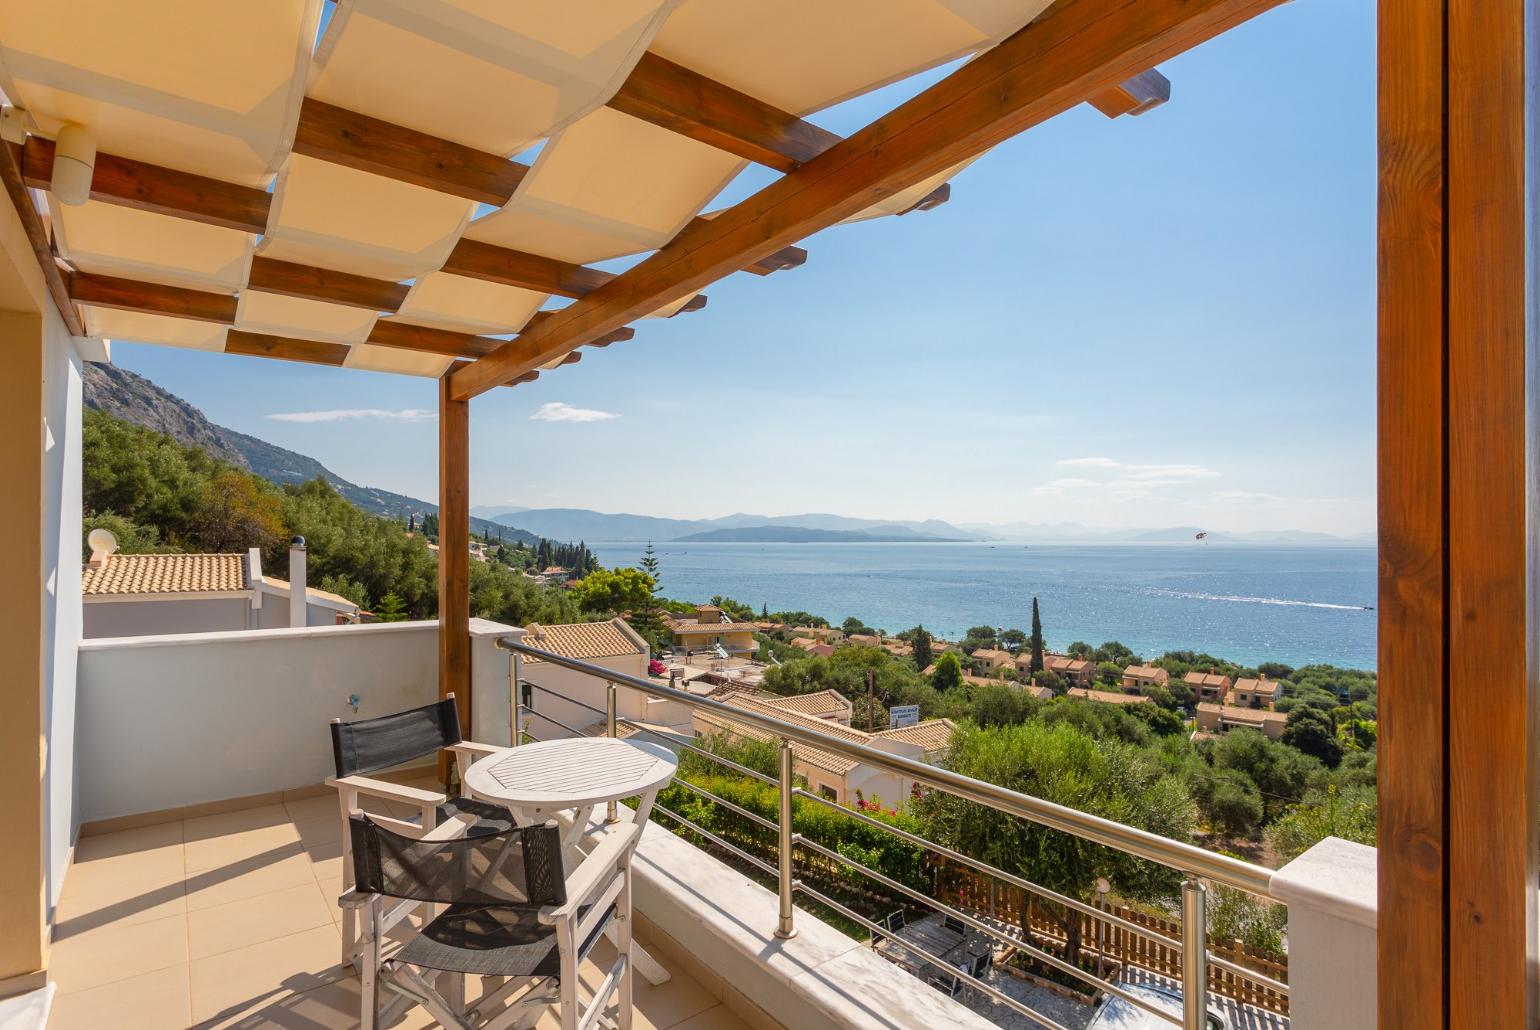 Balcony on second floor with panoramic sea views